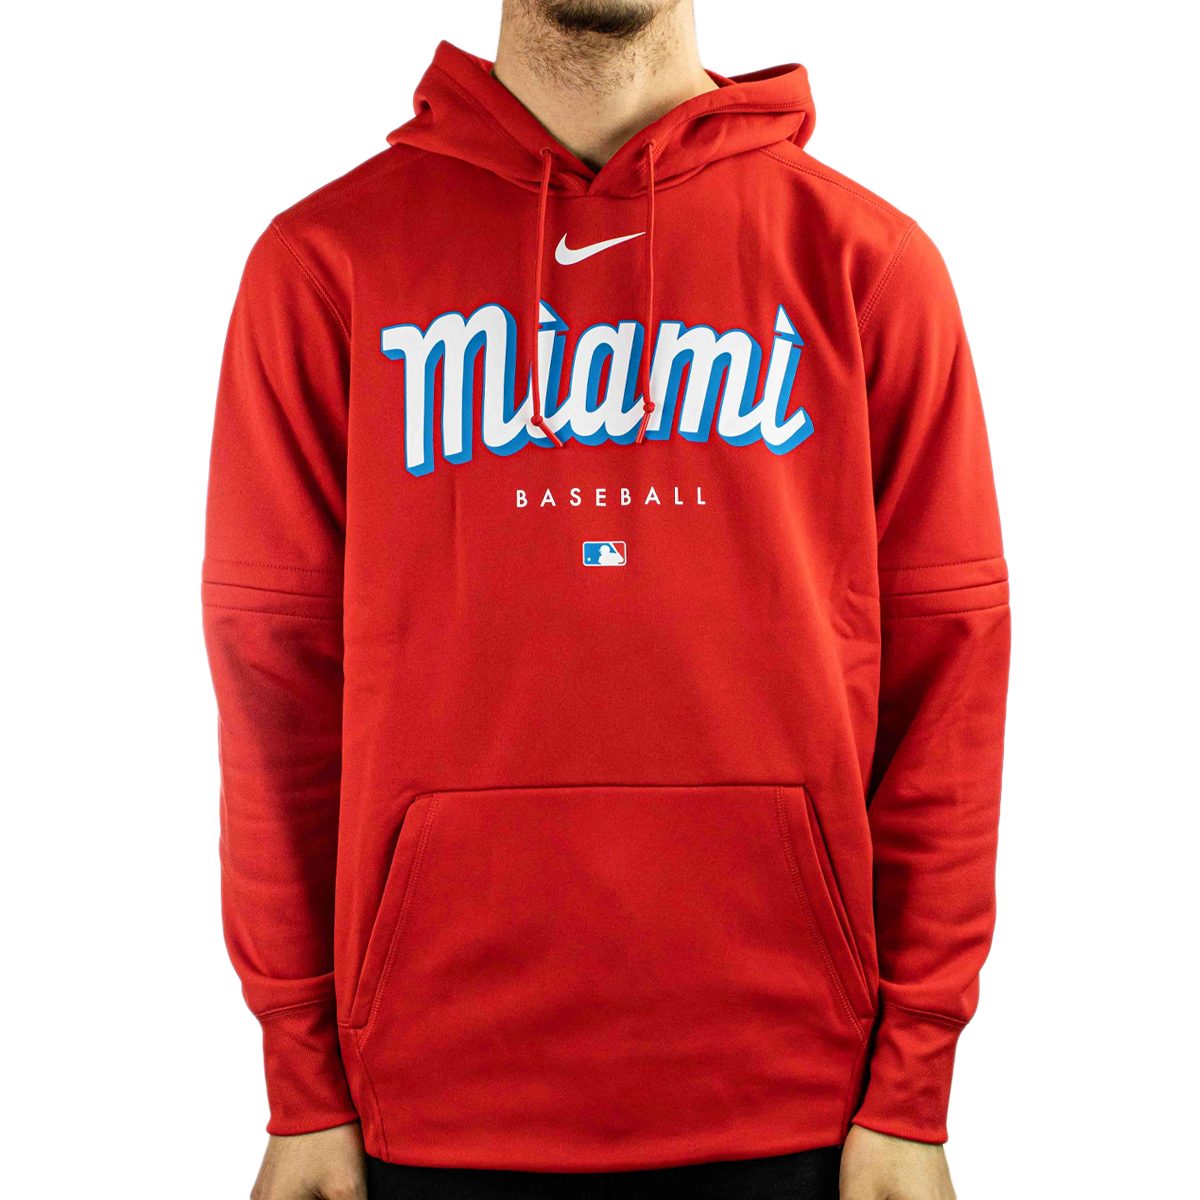 MLB - The Marlins Nike City Connect threads are next level. 🔥